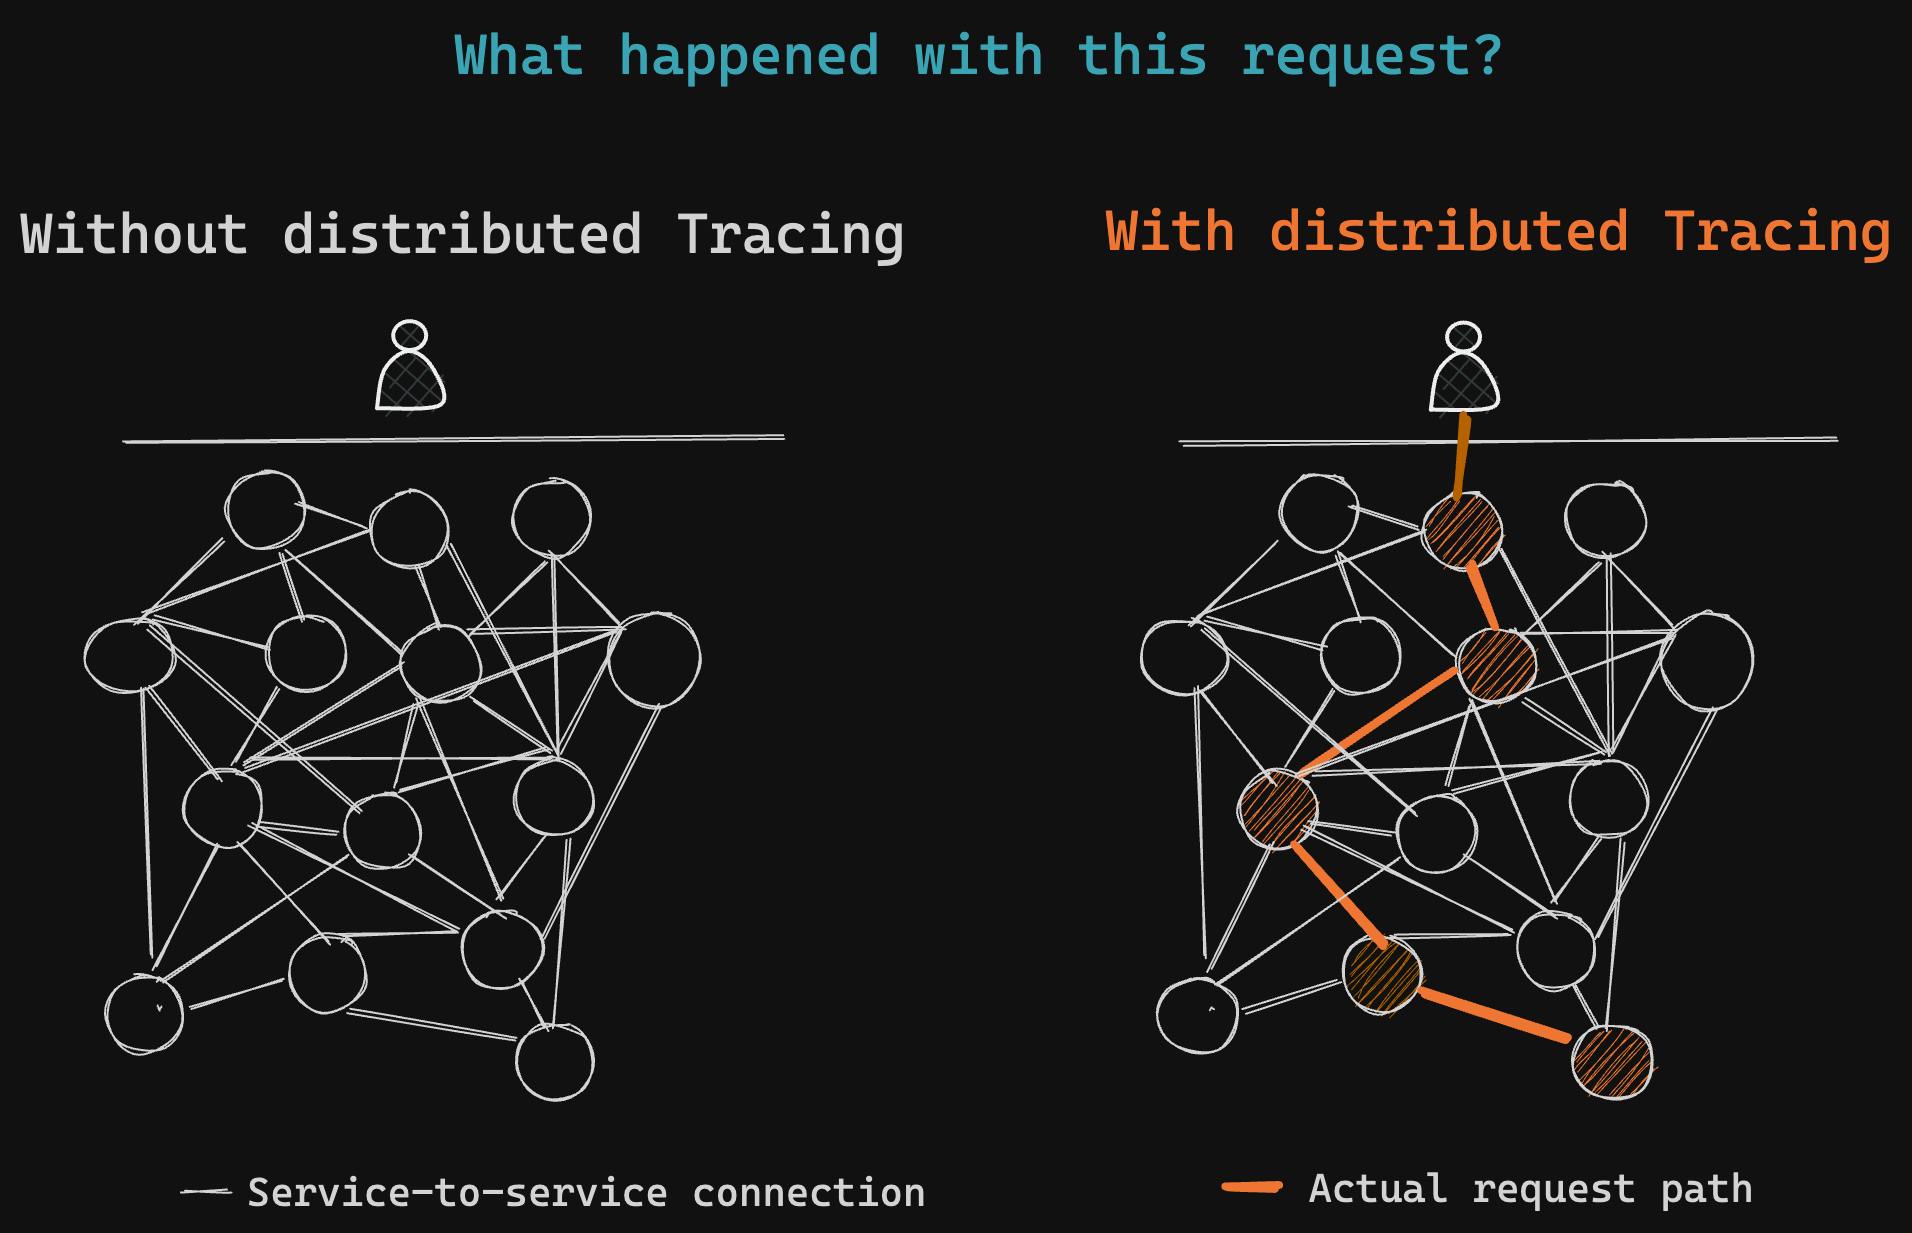 Why we need distributed tracing